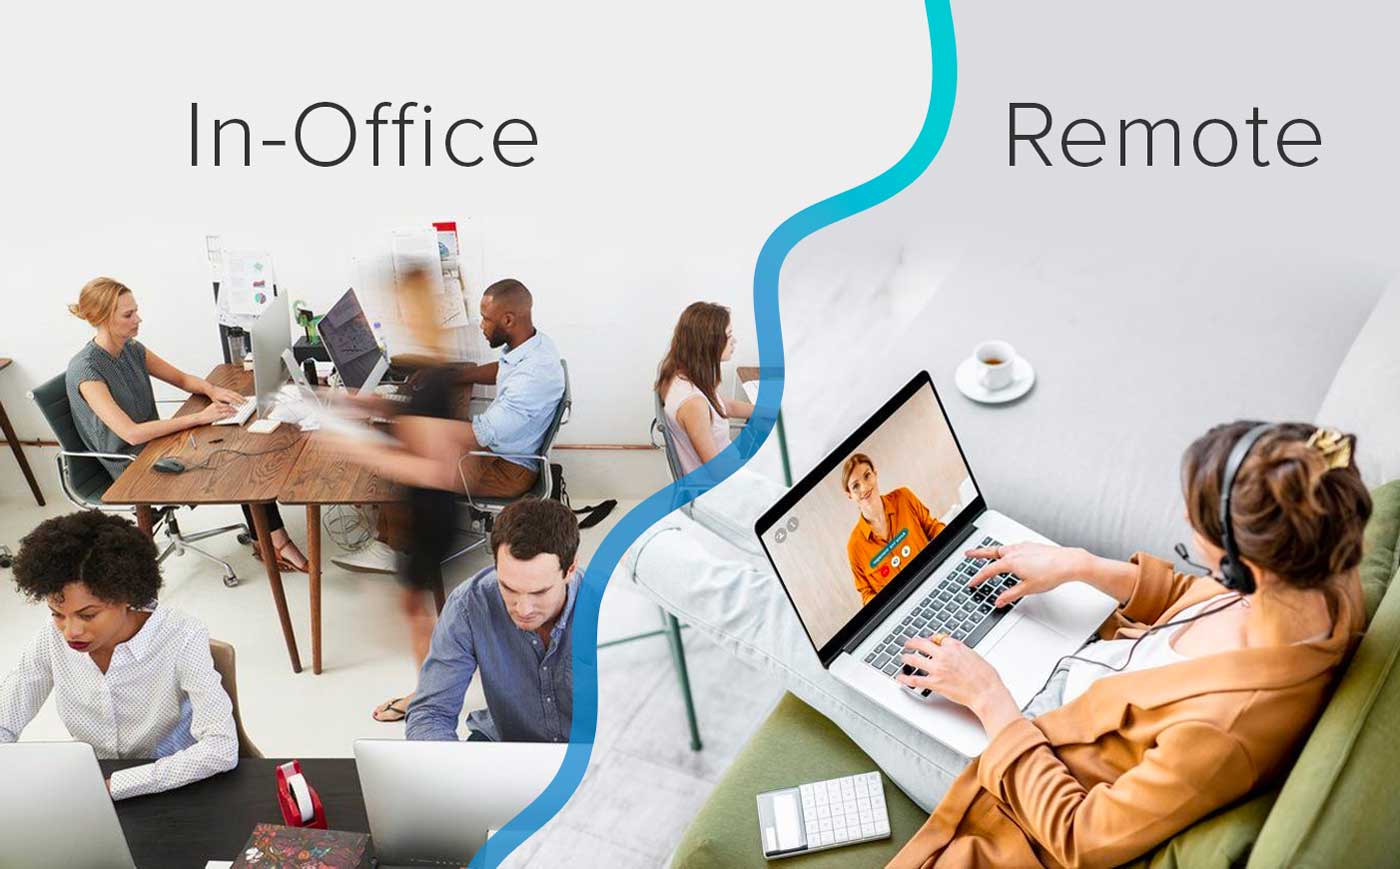 Employees working in-office vs working remotely